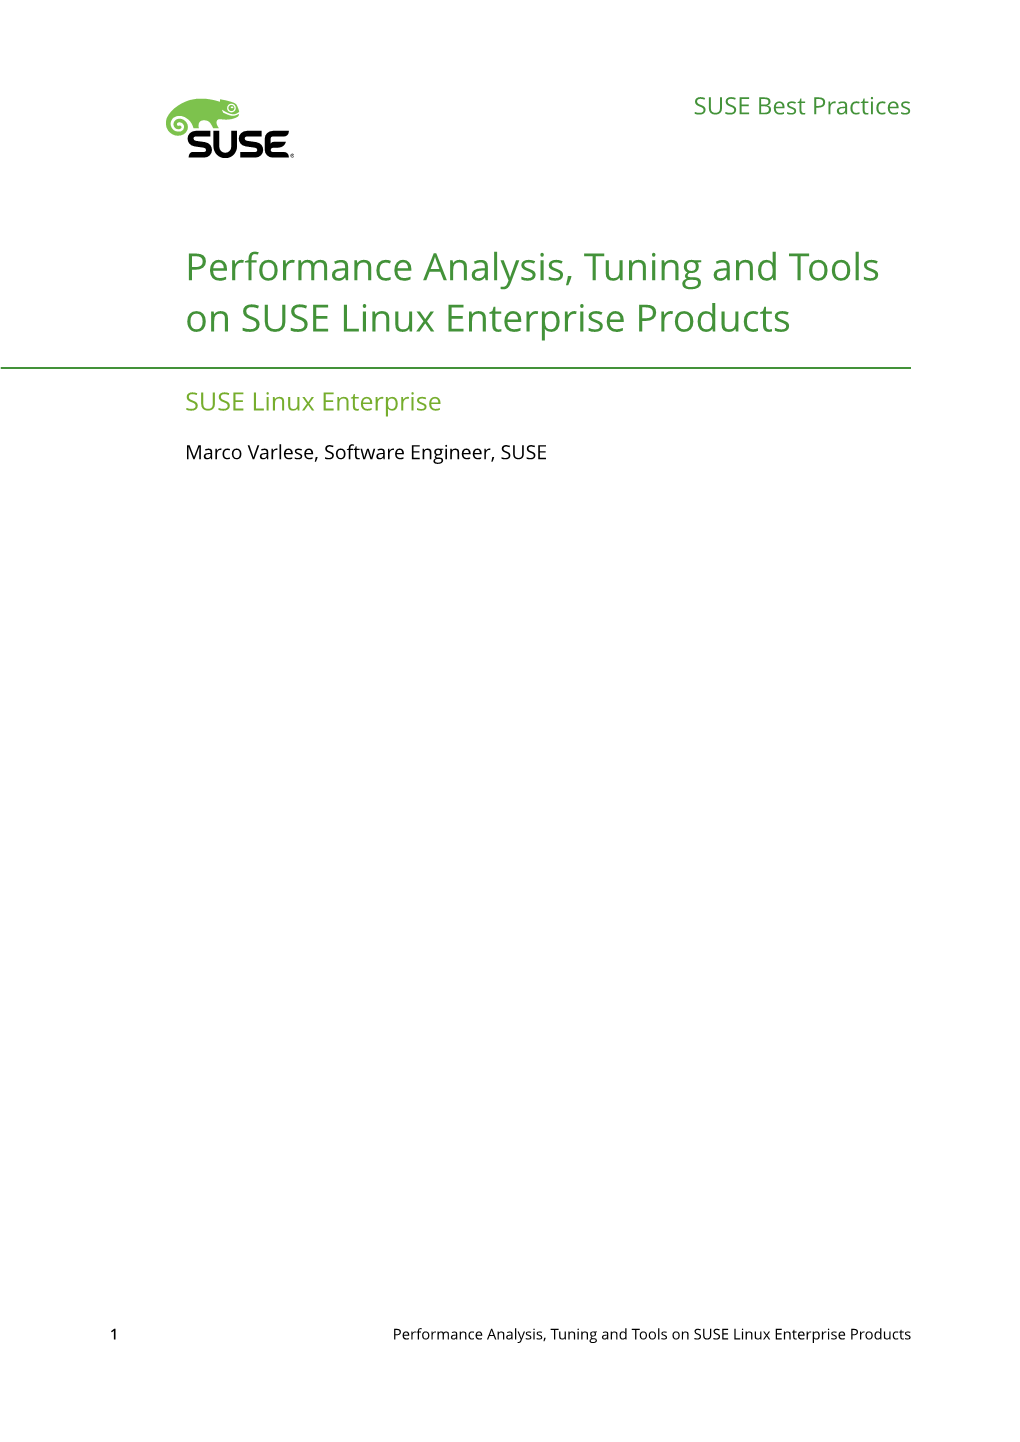 Performance Analysis, Tuning and Tools on SUSE Linux Enterprise Products